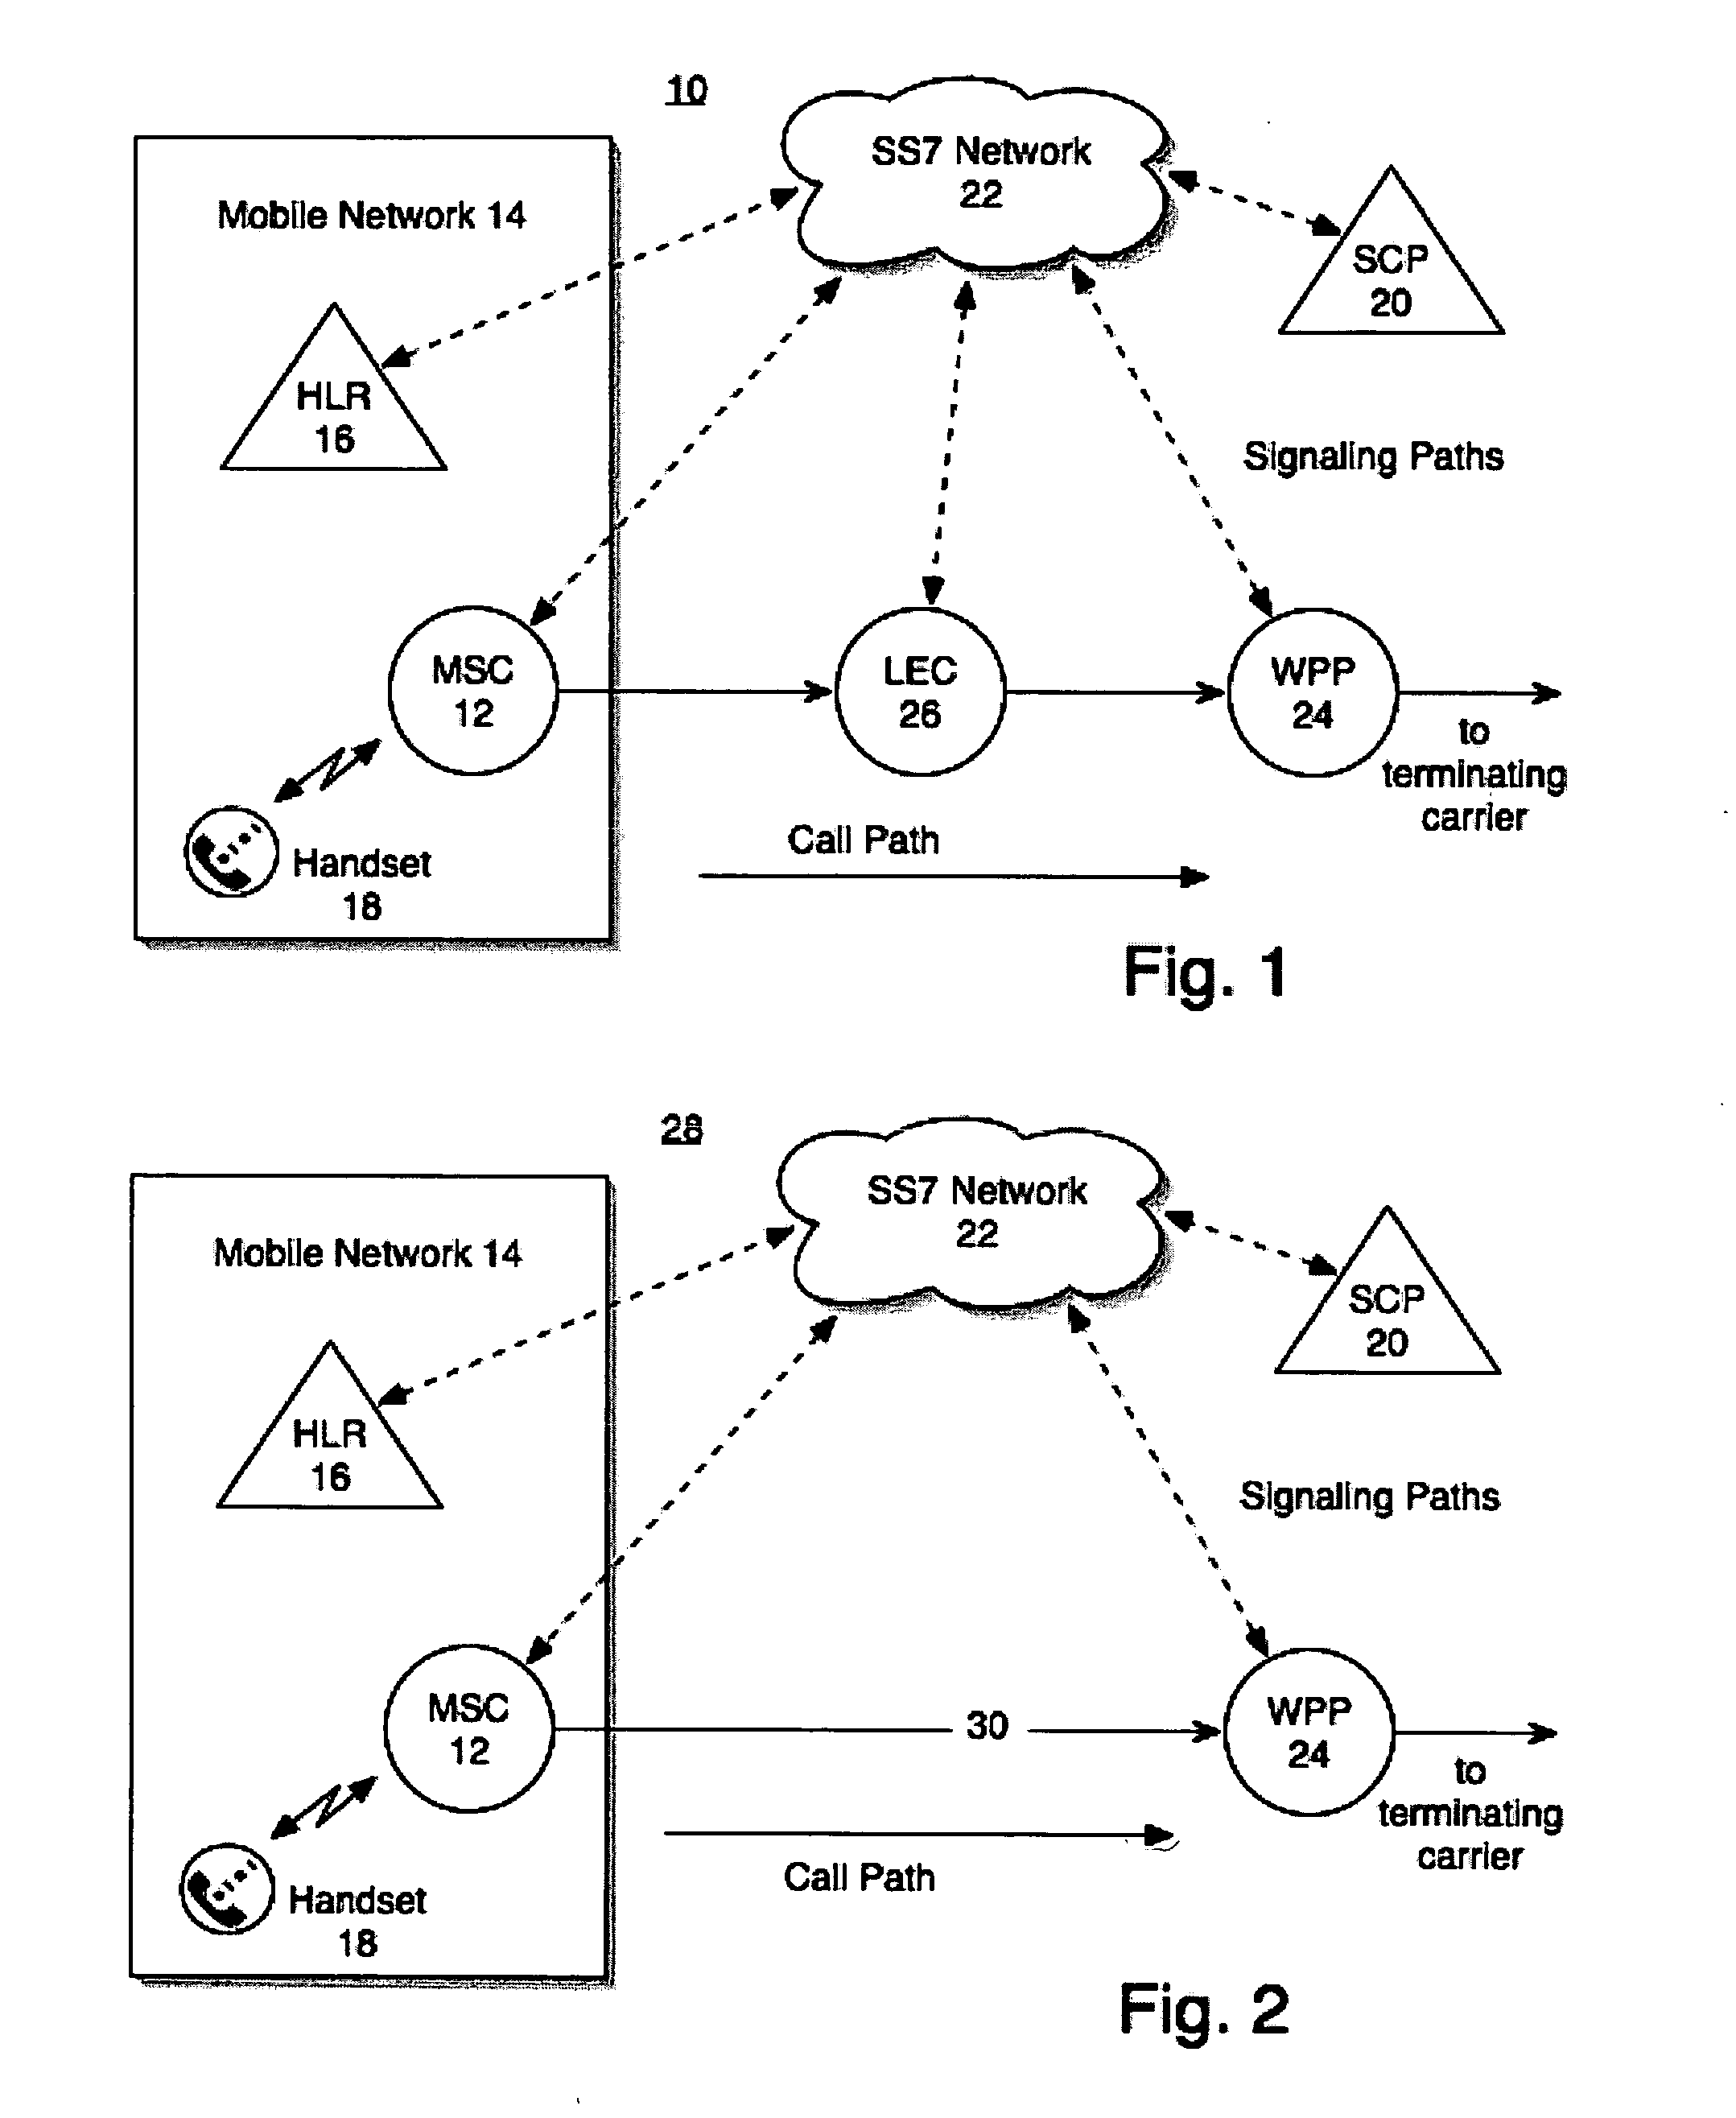 Method and system for routing calls from a wireless telephone network to a wire-line telecommunications services platform